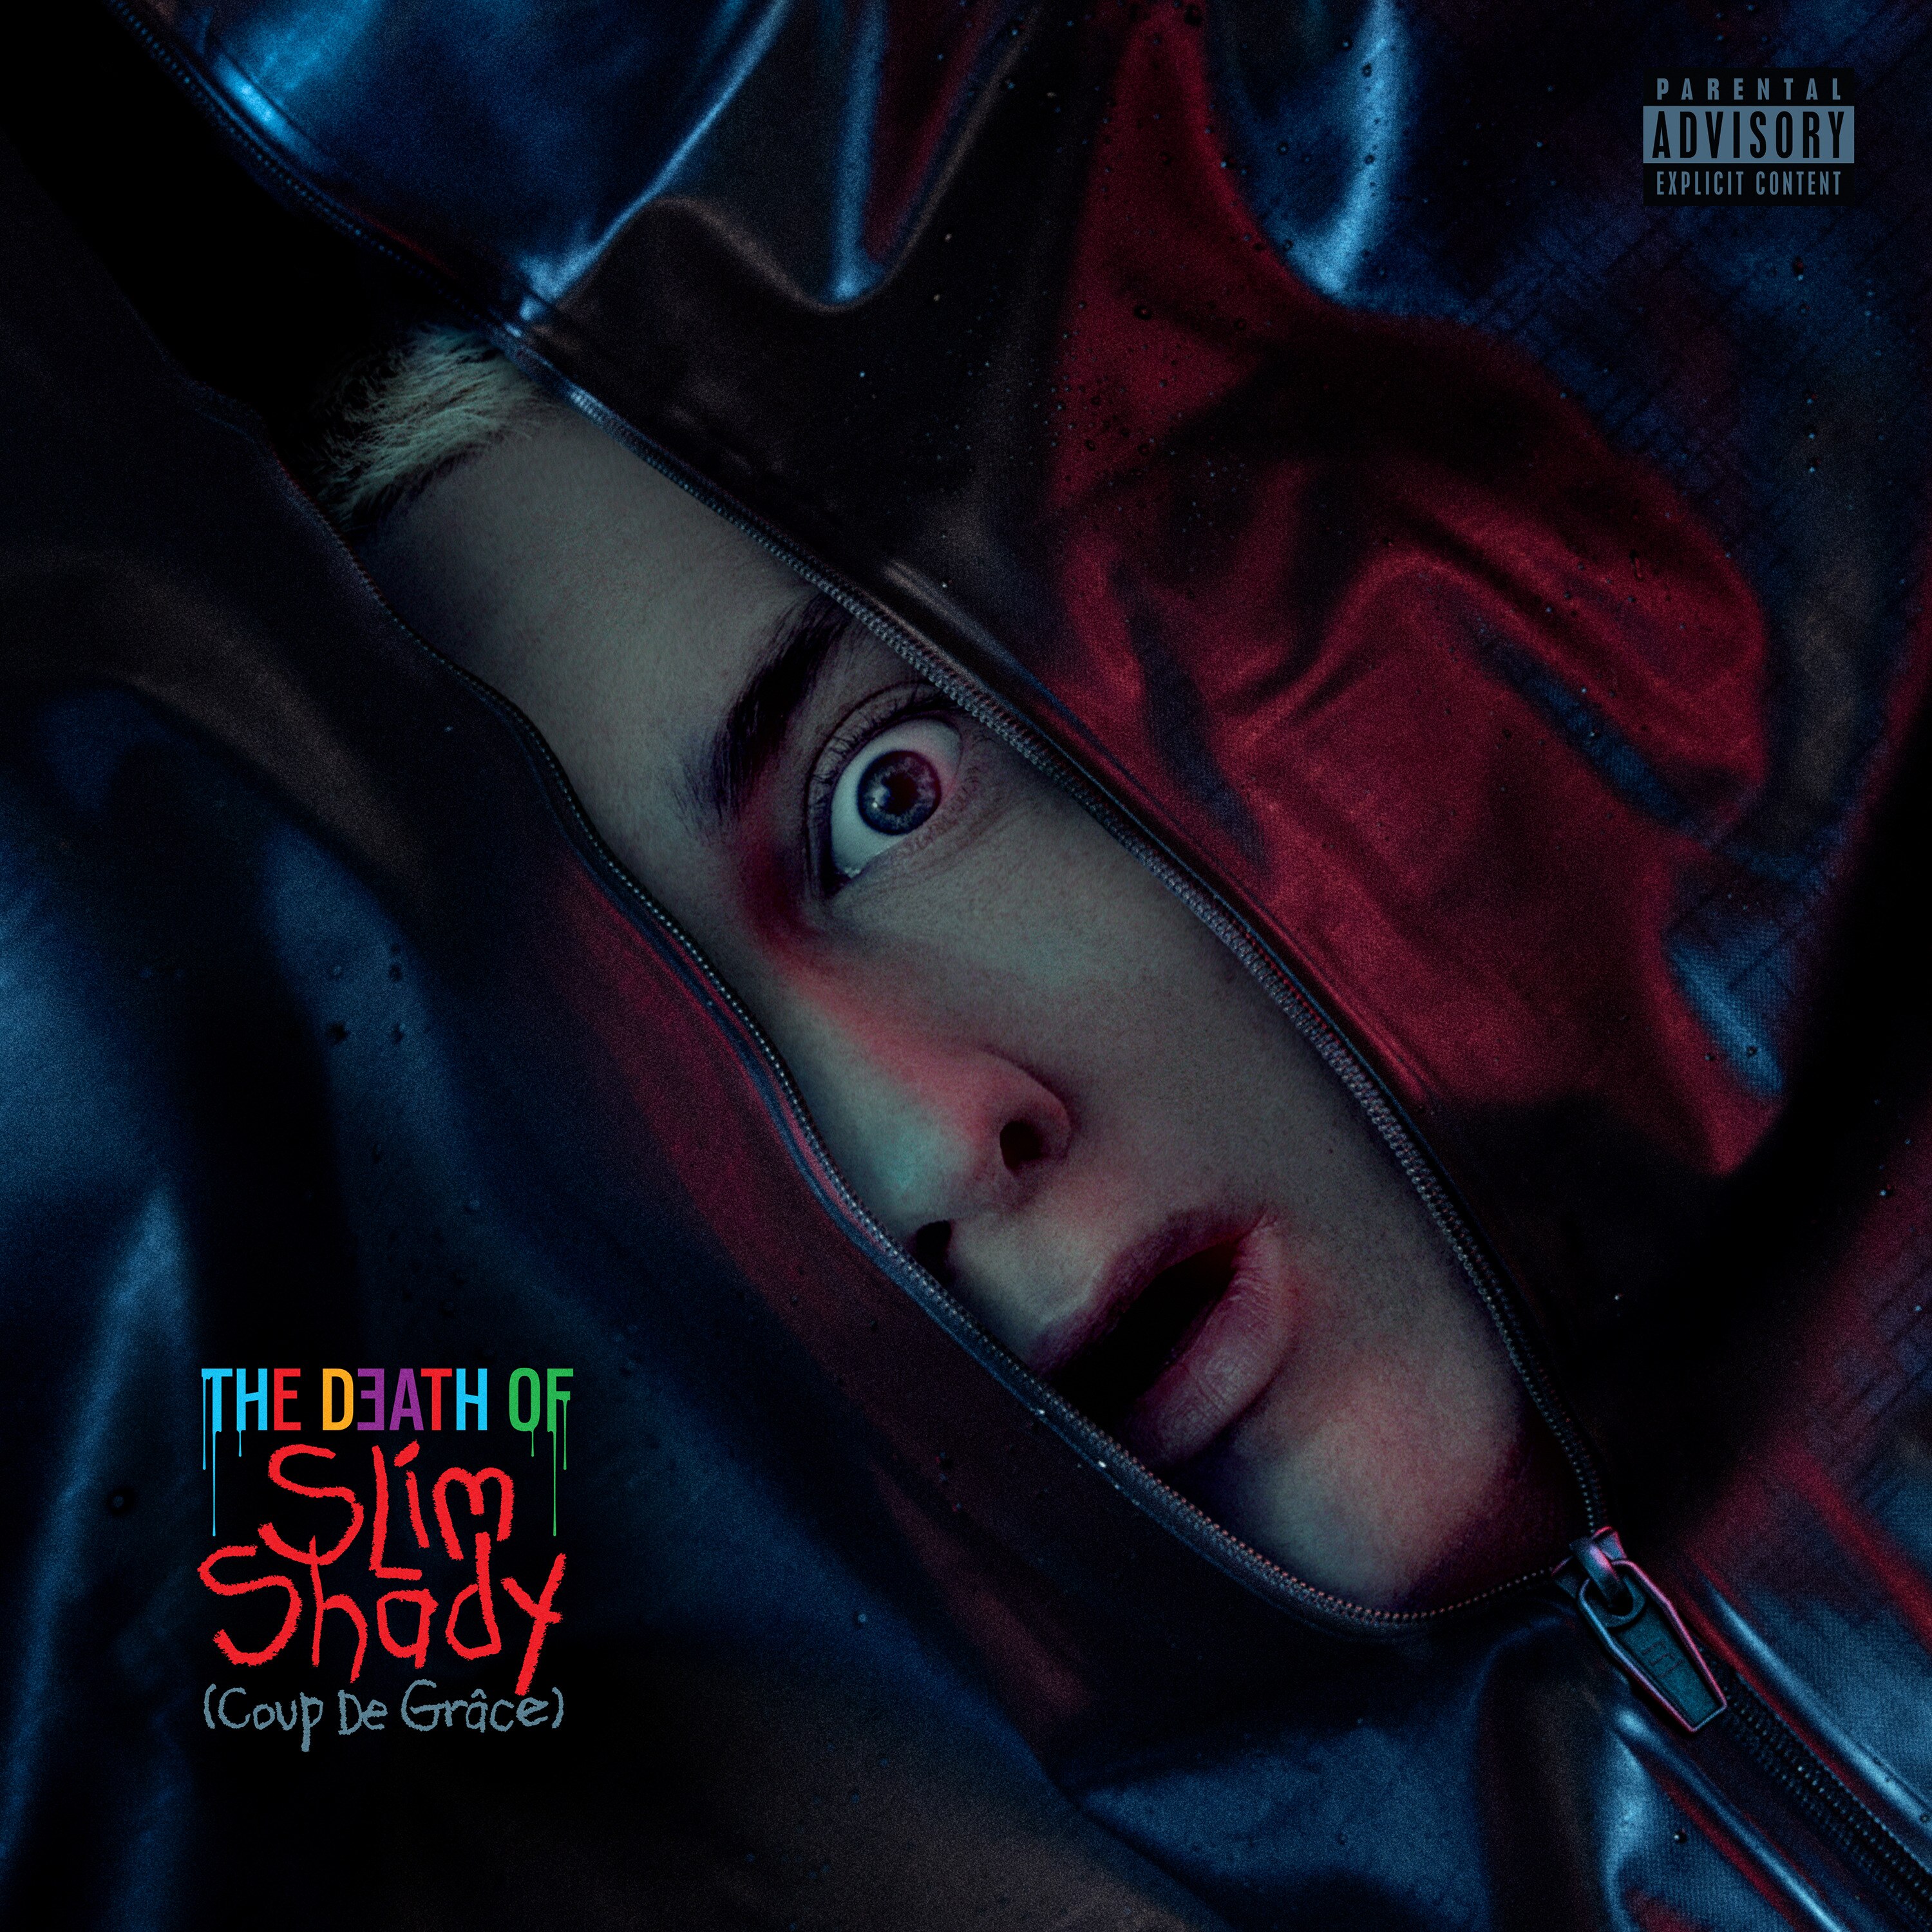 Eminem's face zipped up in a bodybag on cover of new album Death of Slim Shady